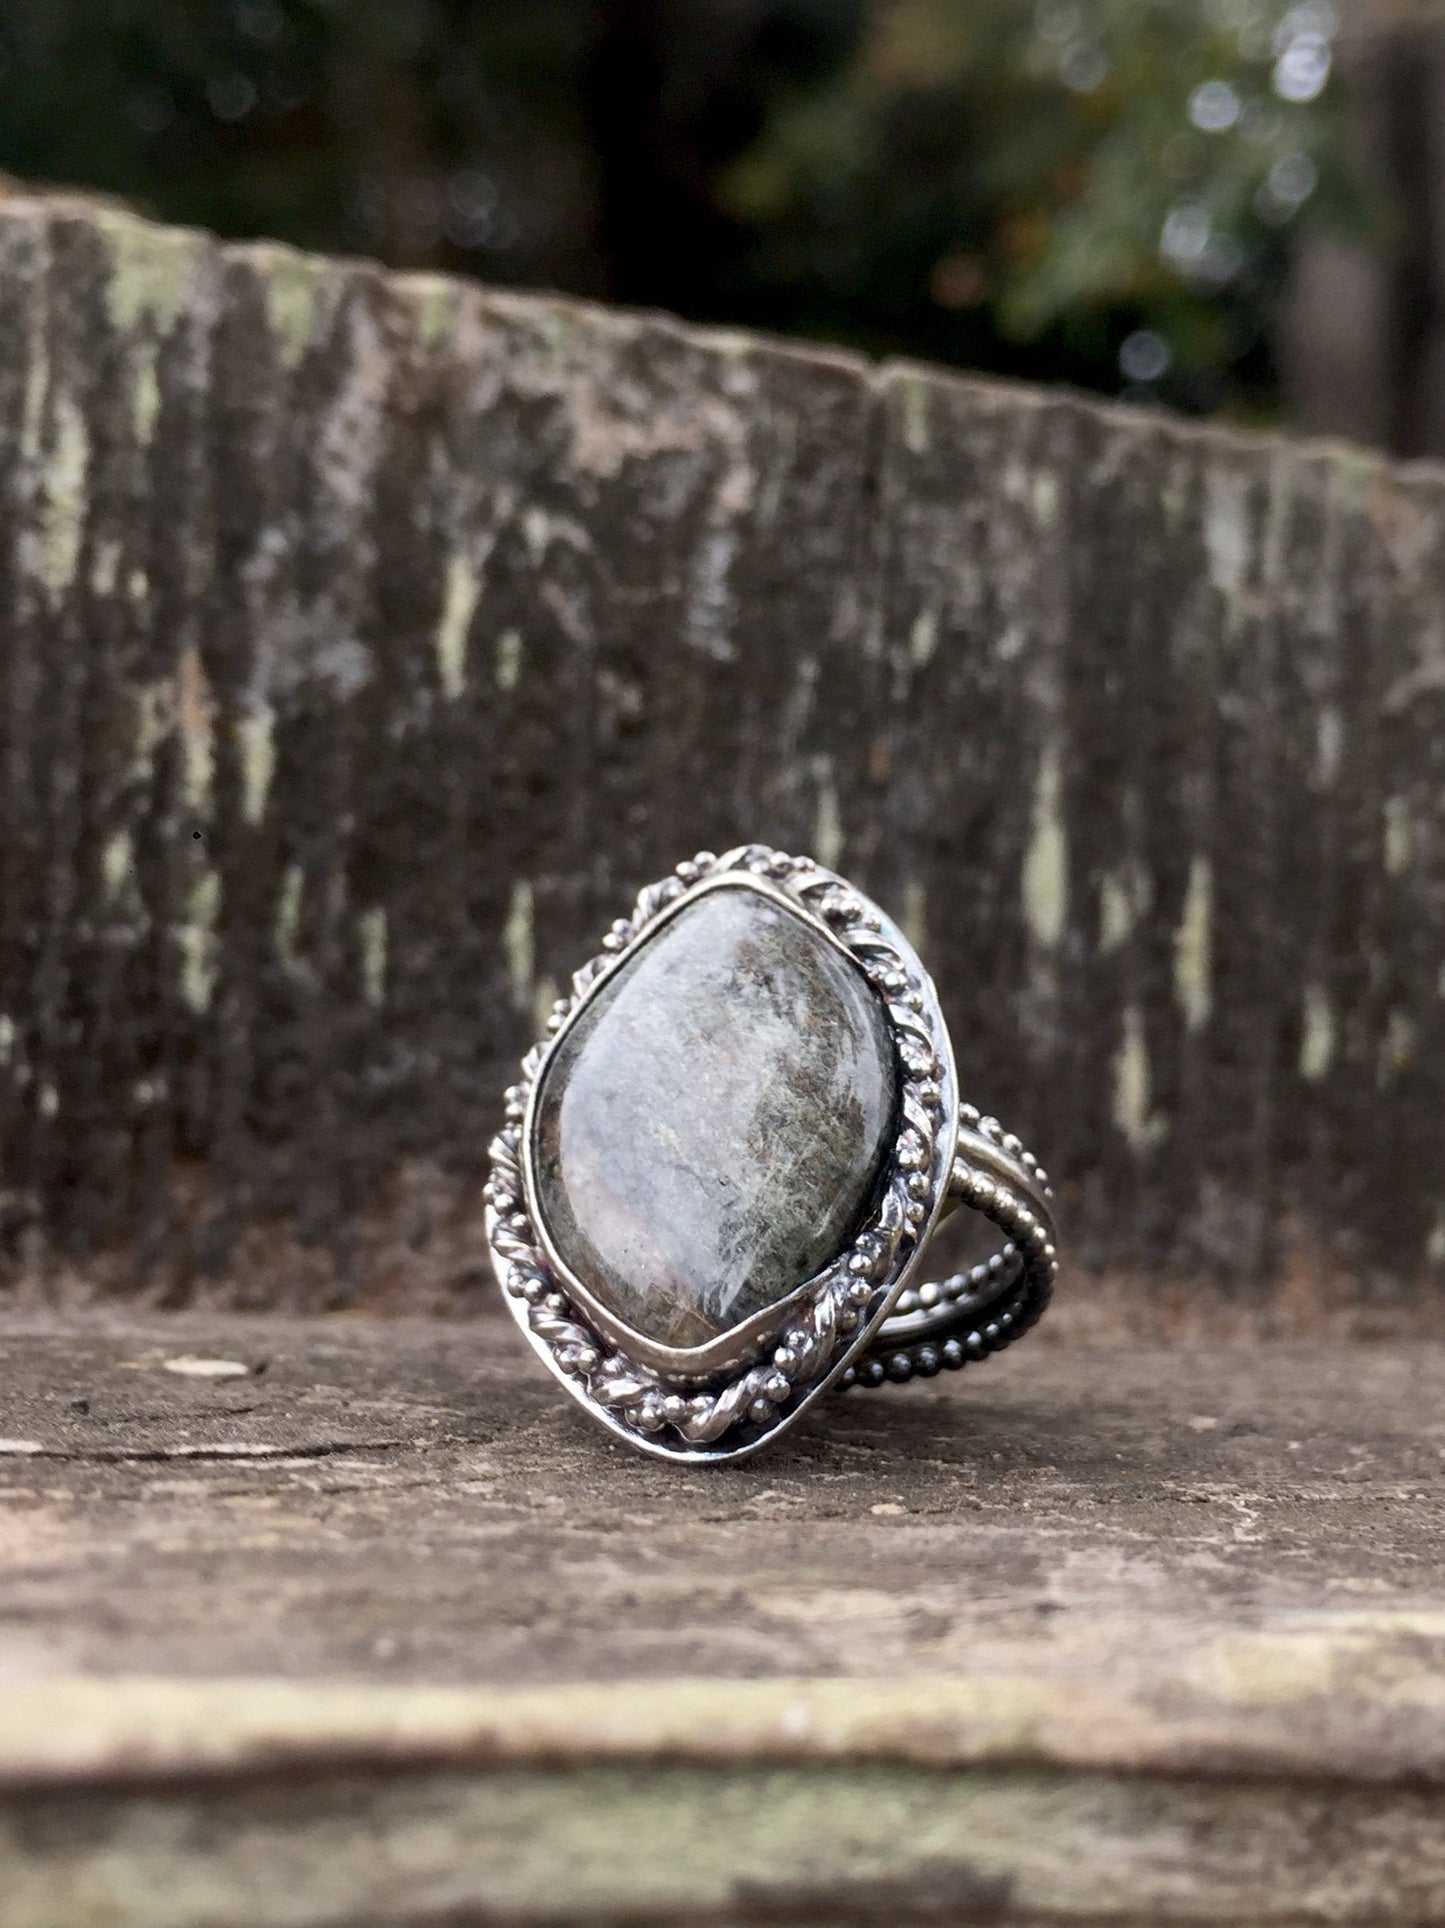 Grey Tourmaline Ring in Sterling Silver, Size 9.75